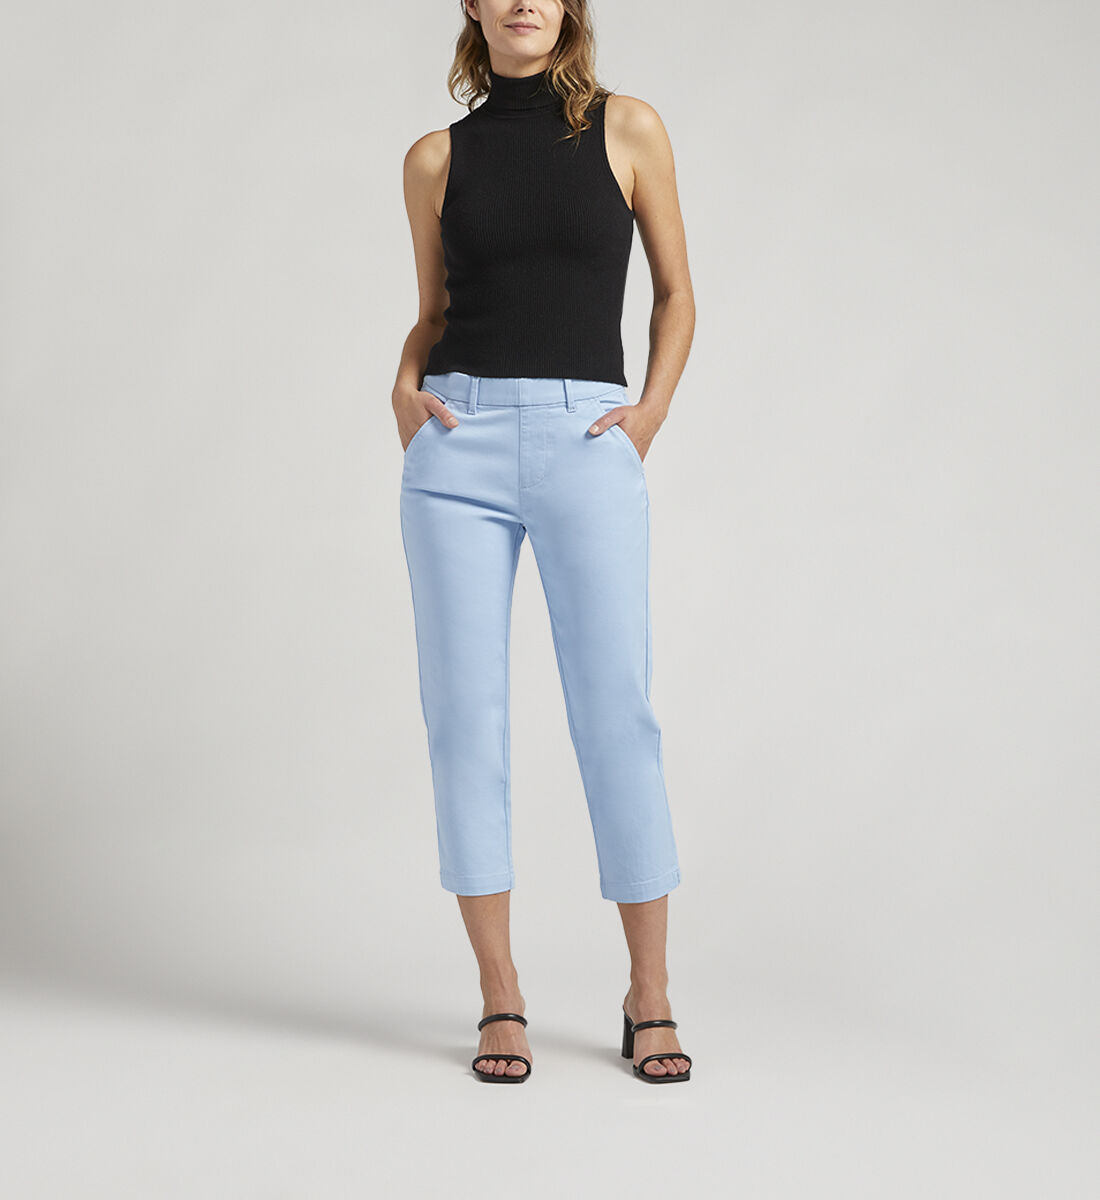 Buy Maddie Mid Rise Capri for USD 44.00 | Jag Jeans US New